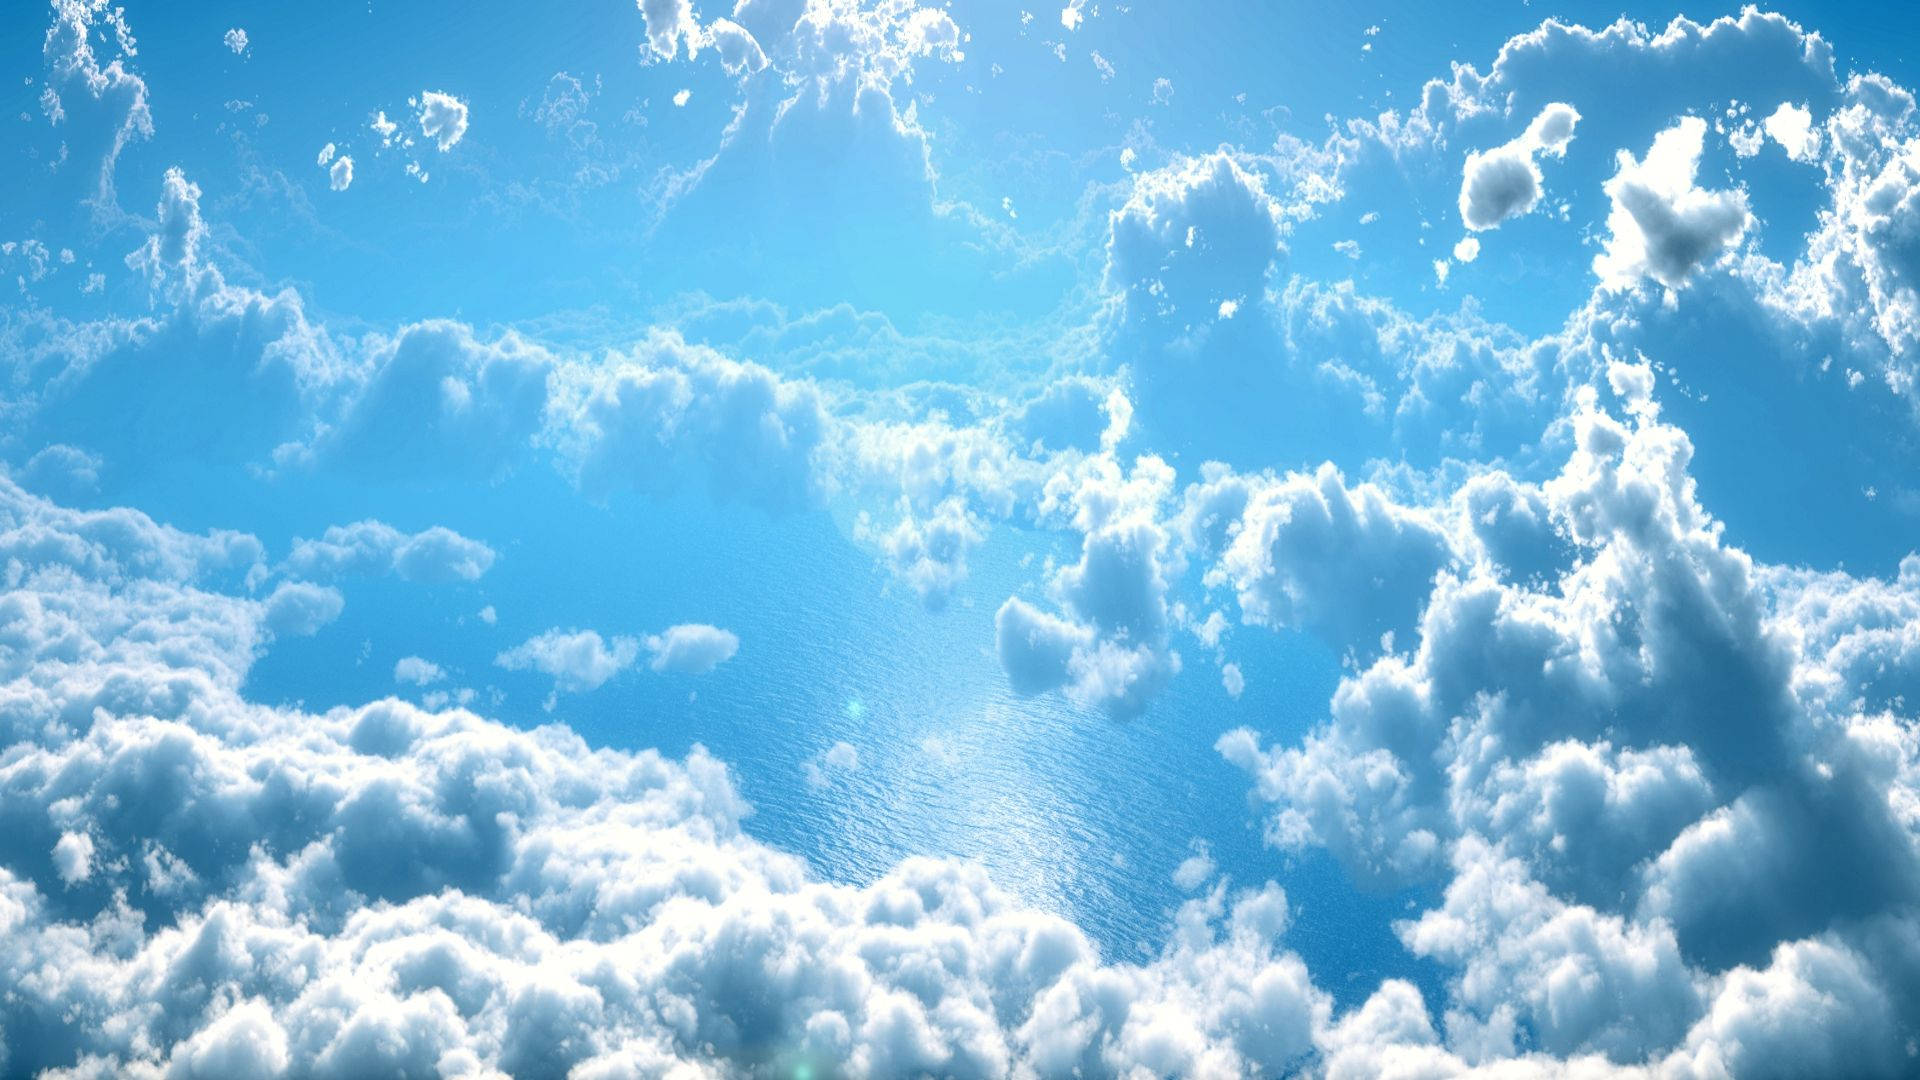 A Blue Sky With Clouds And Sun Background